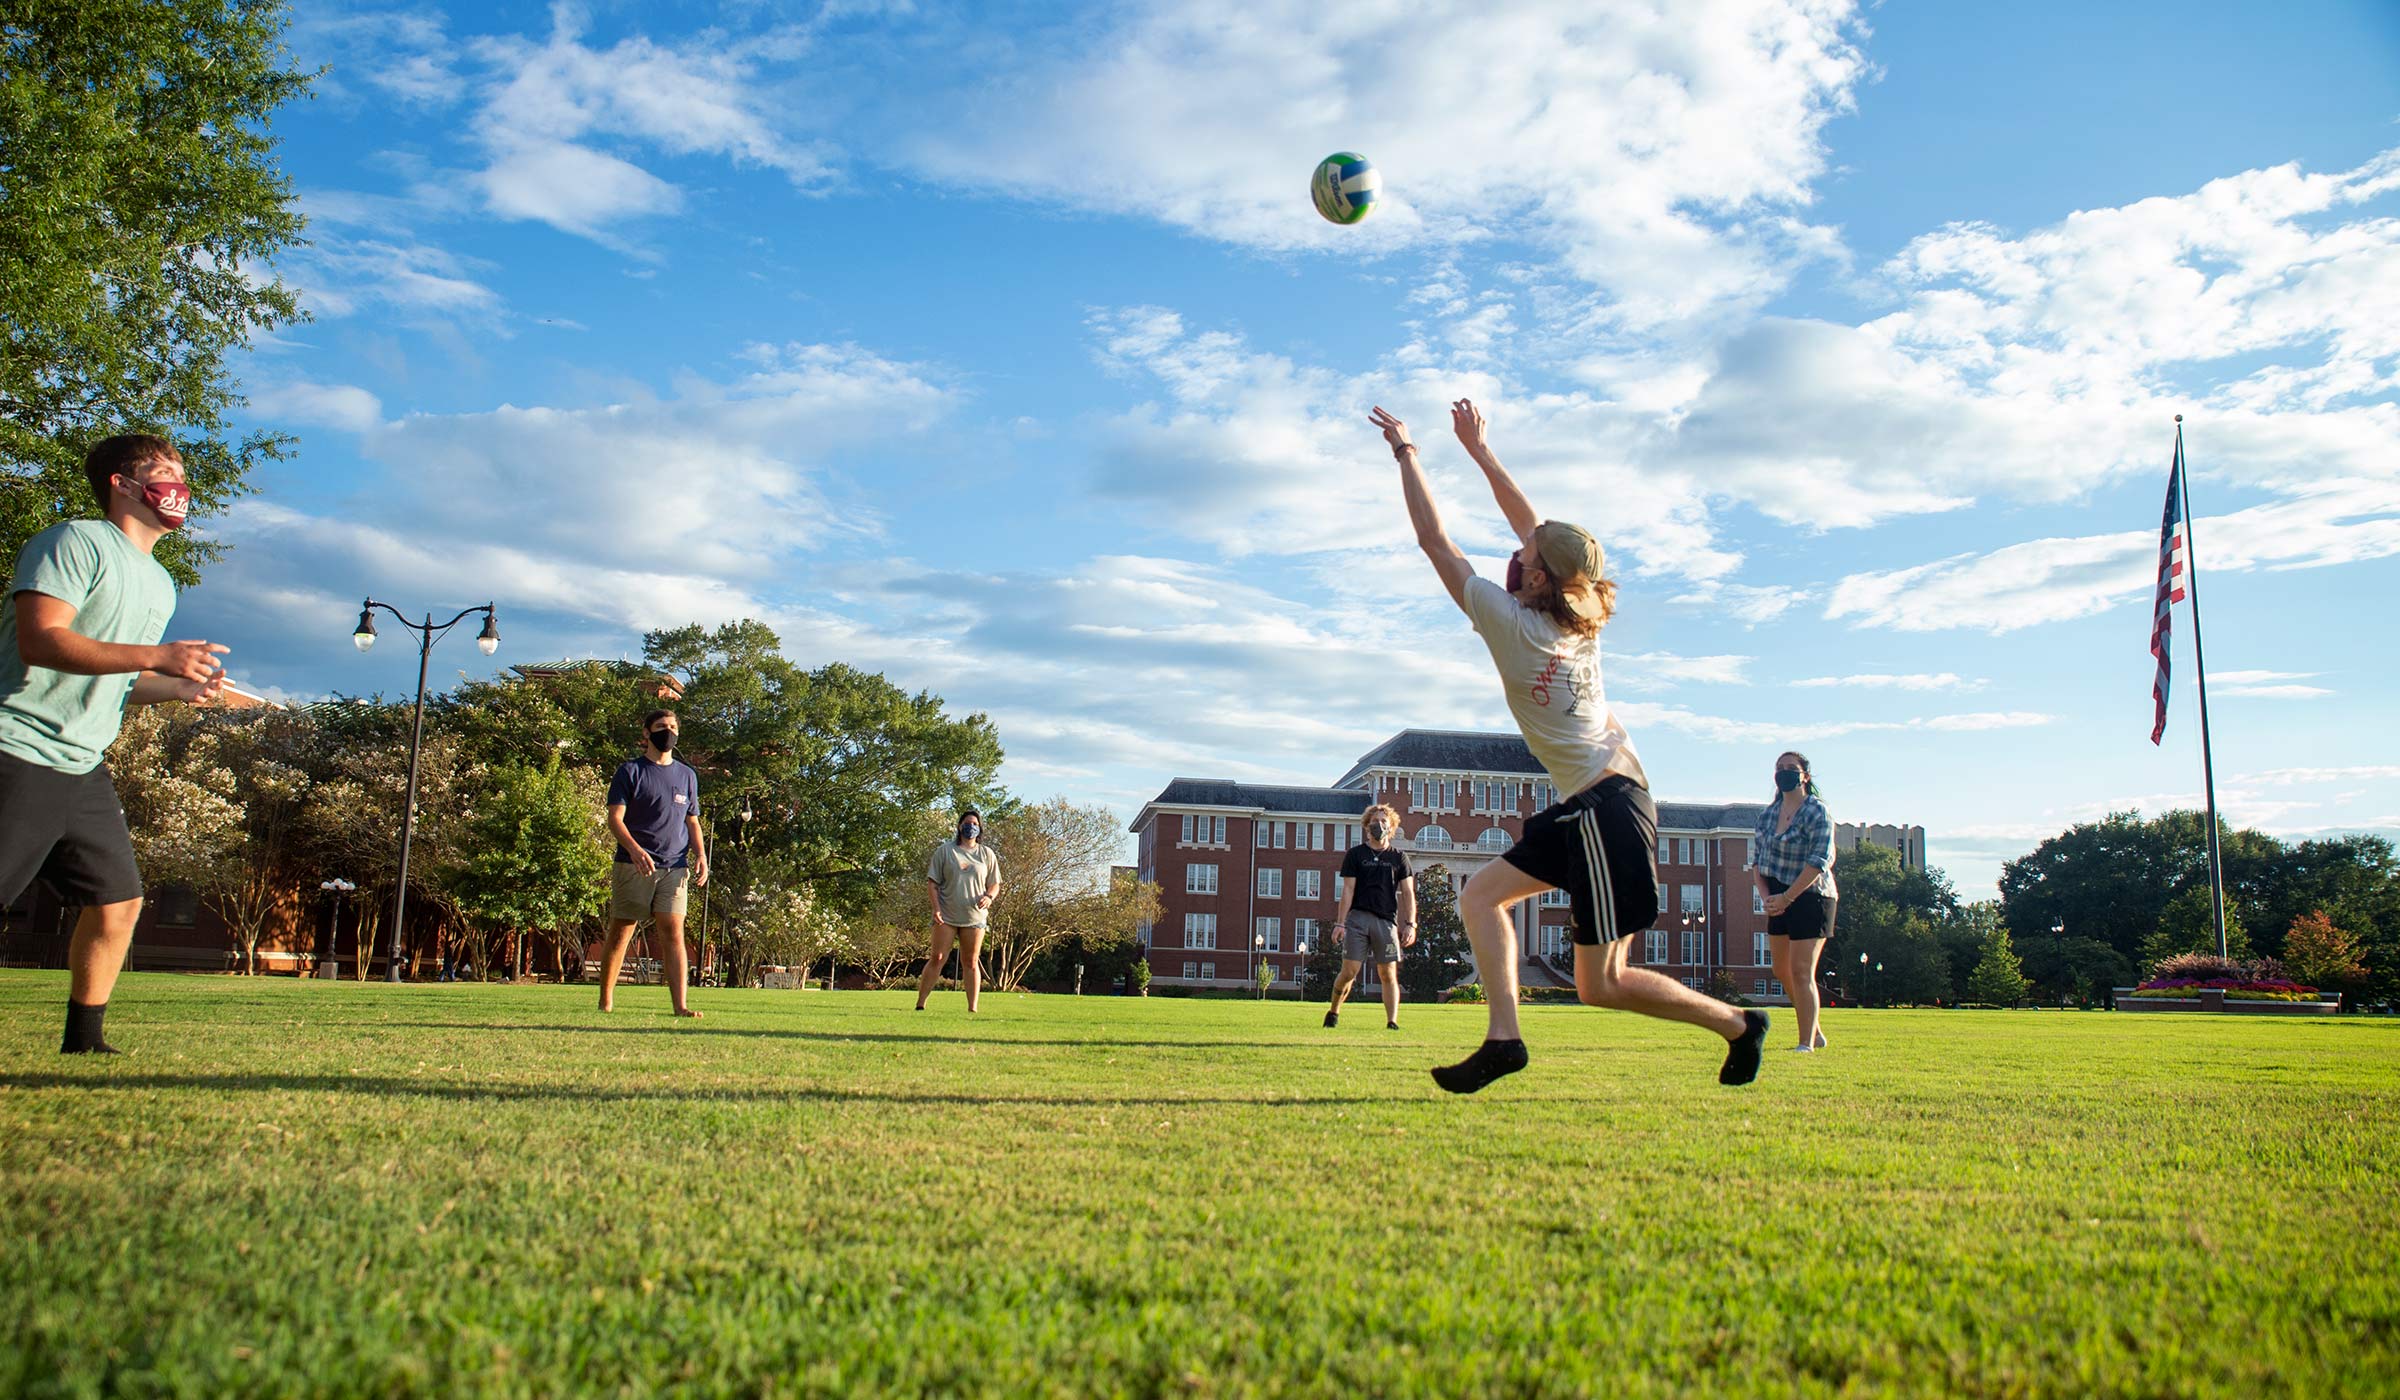 Under a partly cloudy blue evening sky, mask-wearing students toss a volleyball between them on the Drill Field.